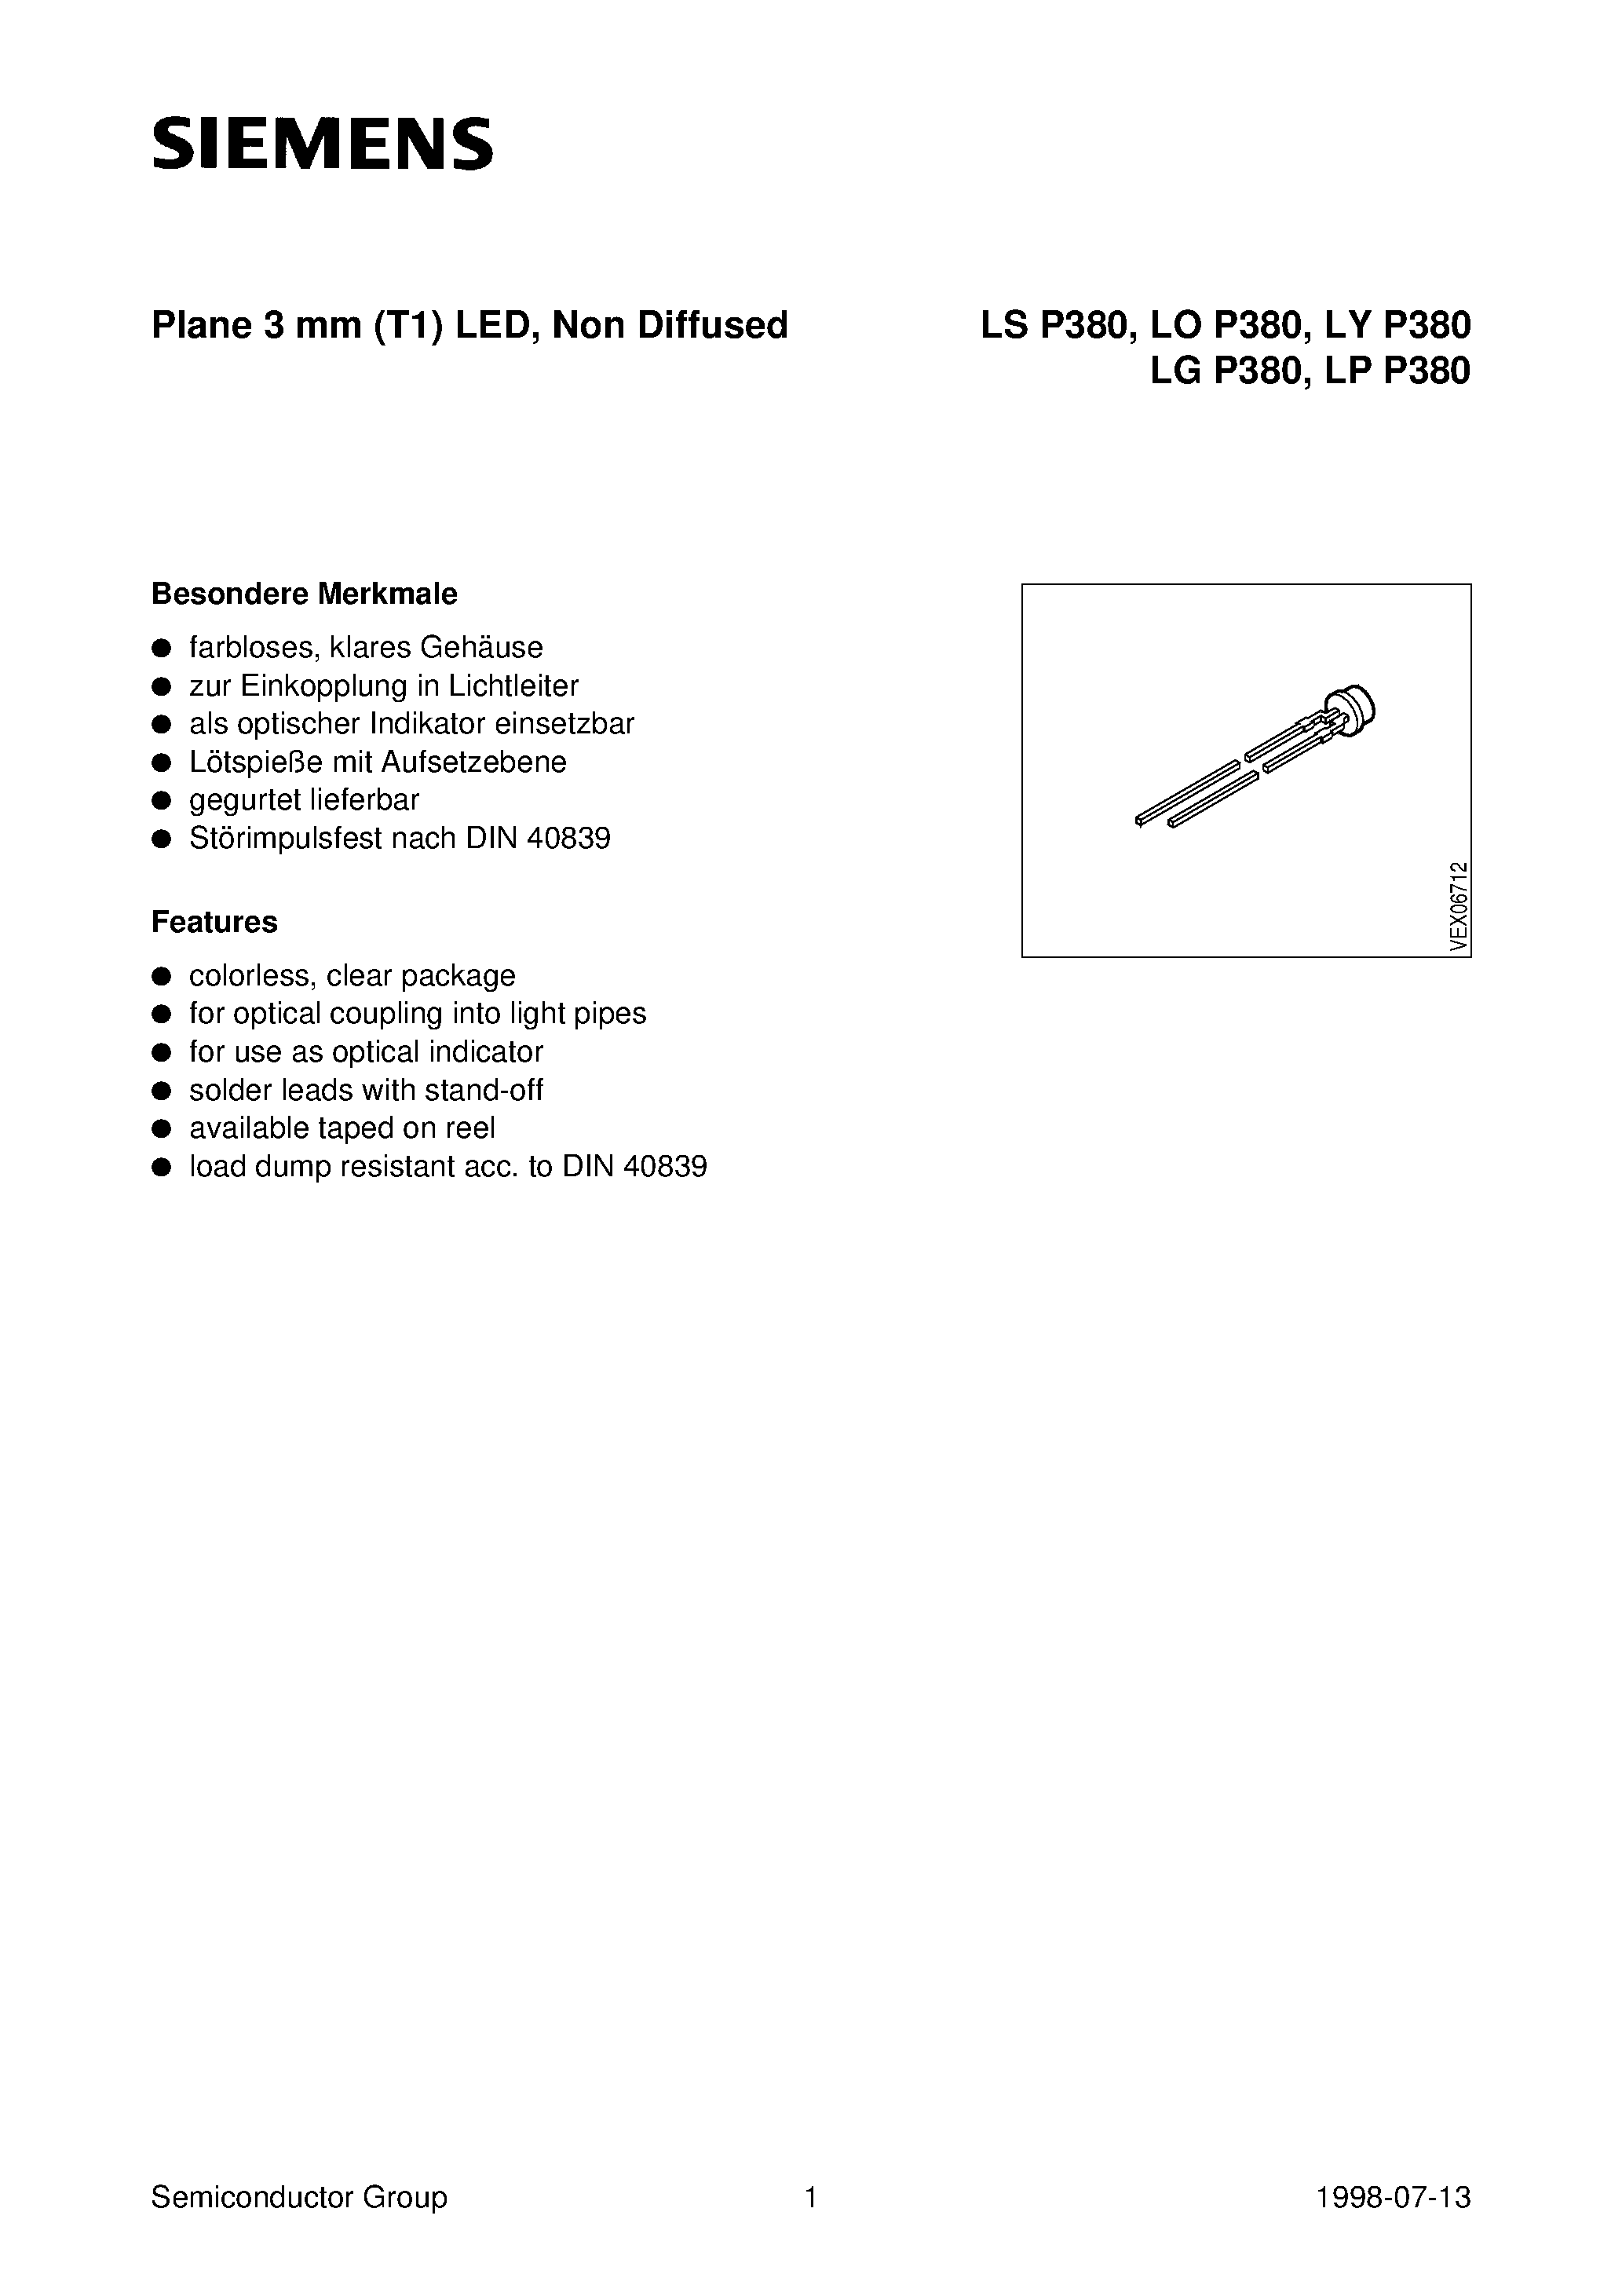 Datasheet LYP380-N - Plane 3 mm (T1) LED/ Non Diffused page 1